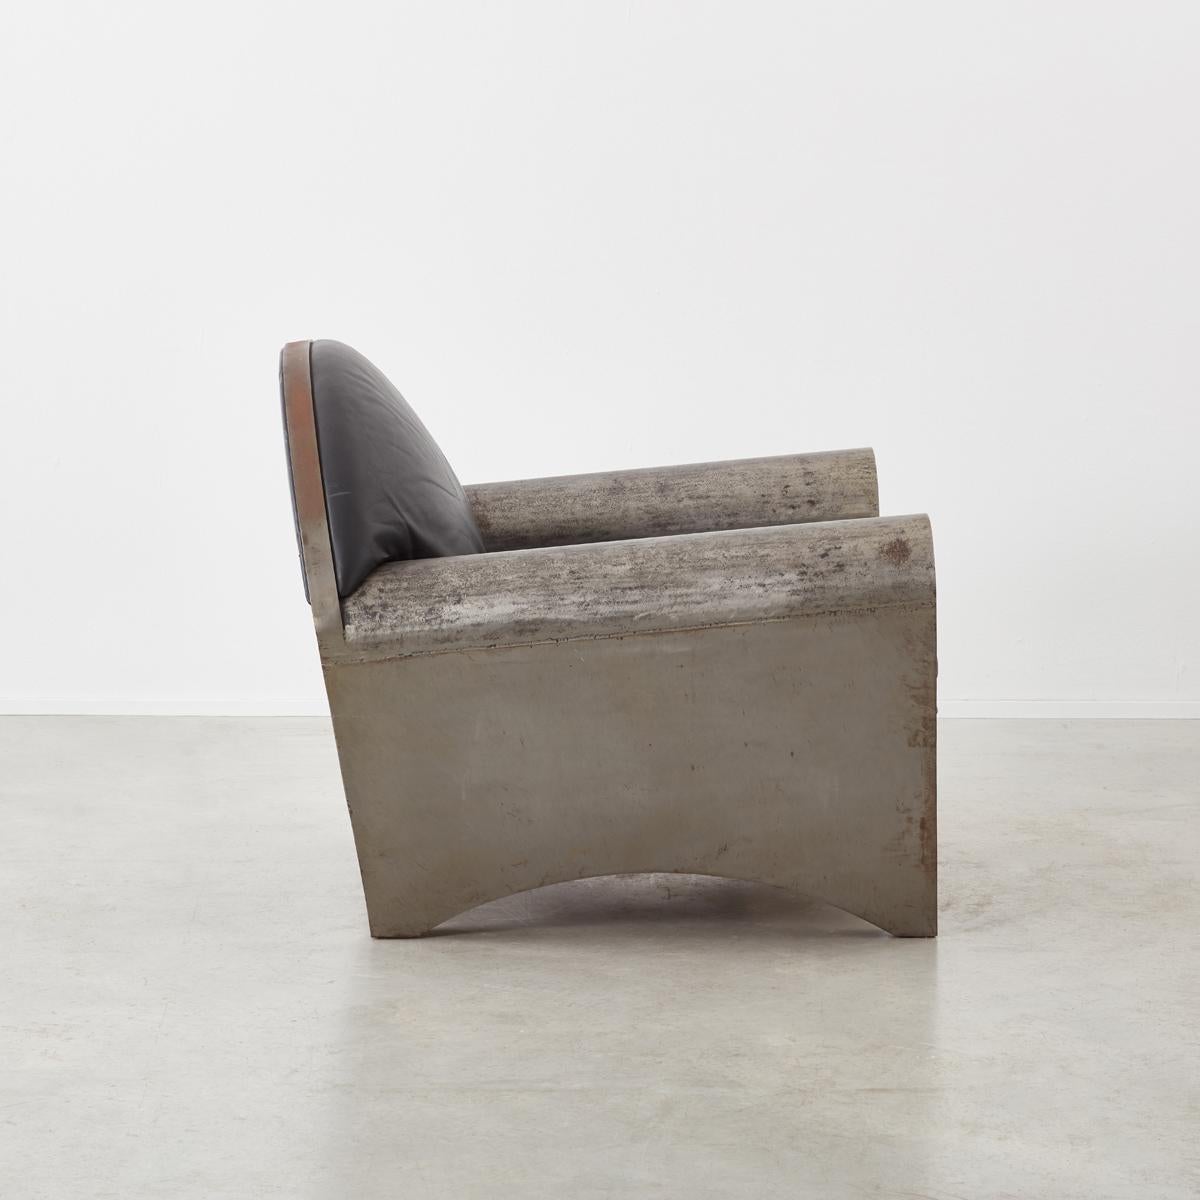 Post-Modern Peter Thode Steel Lounge Chair, Germany, 1991